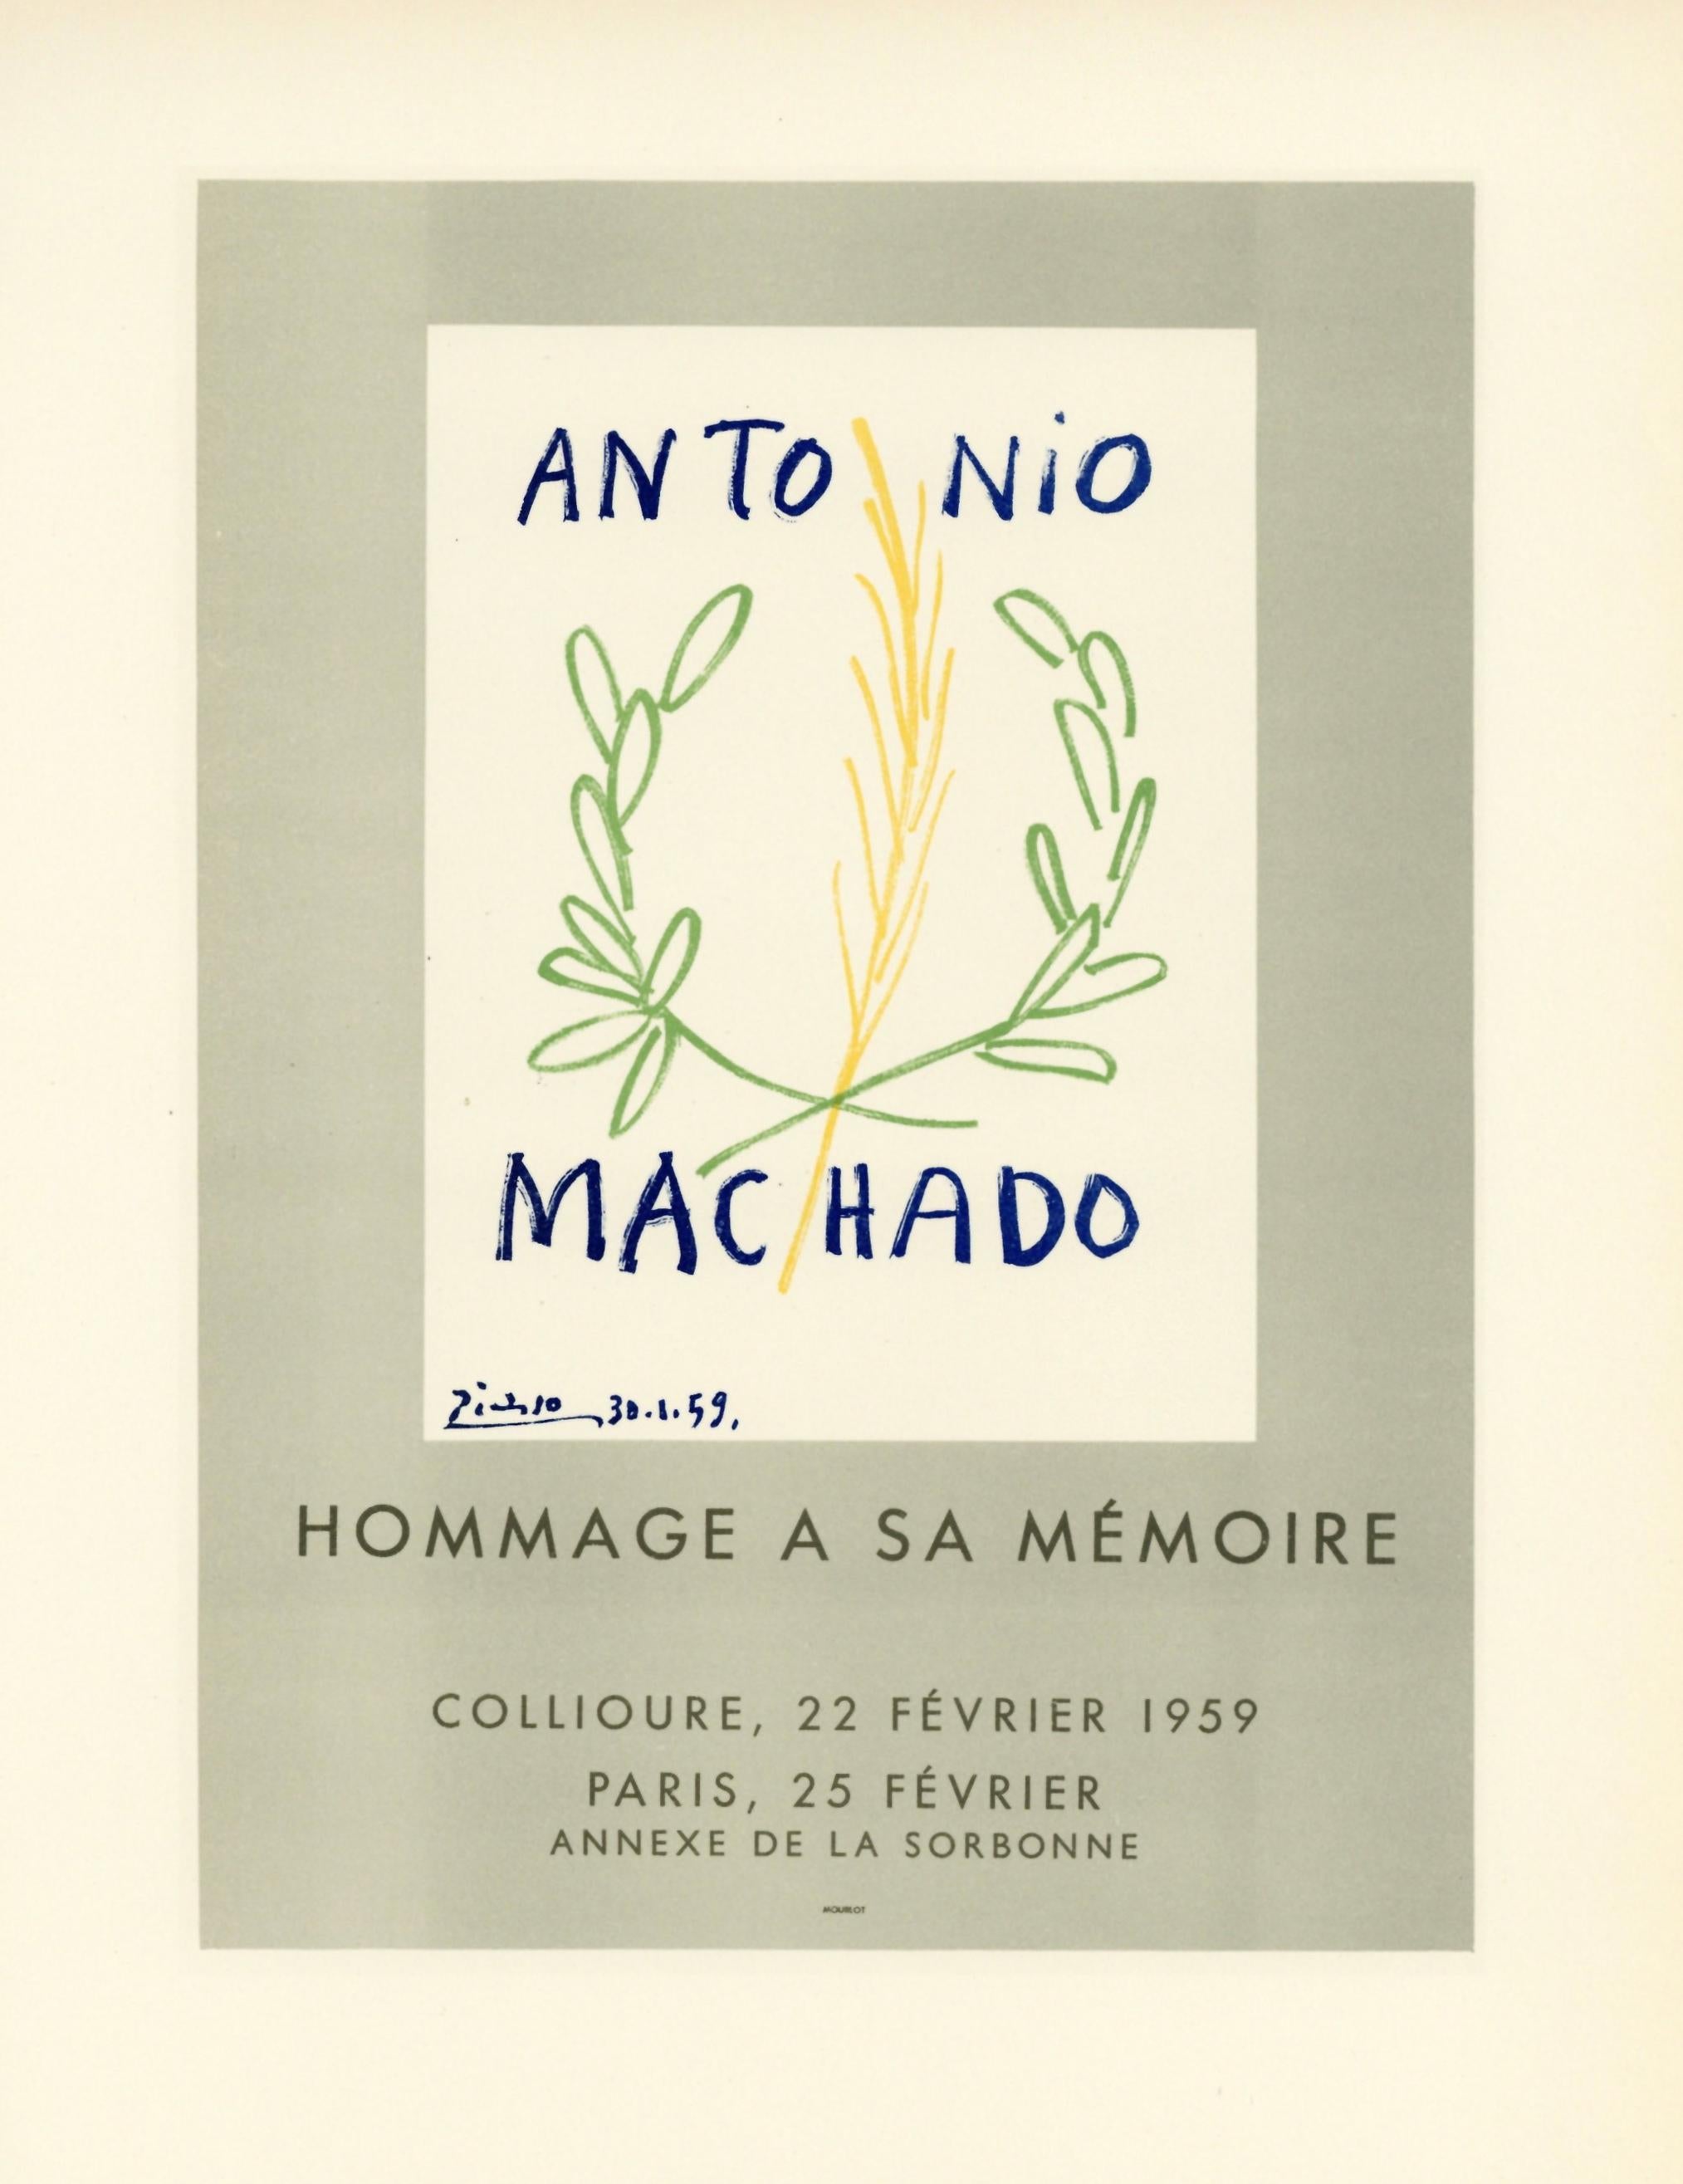 "Hommage a Antonio Machado" lithograph poster - Print by (after) Pablo Picasso